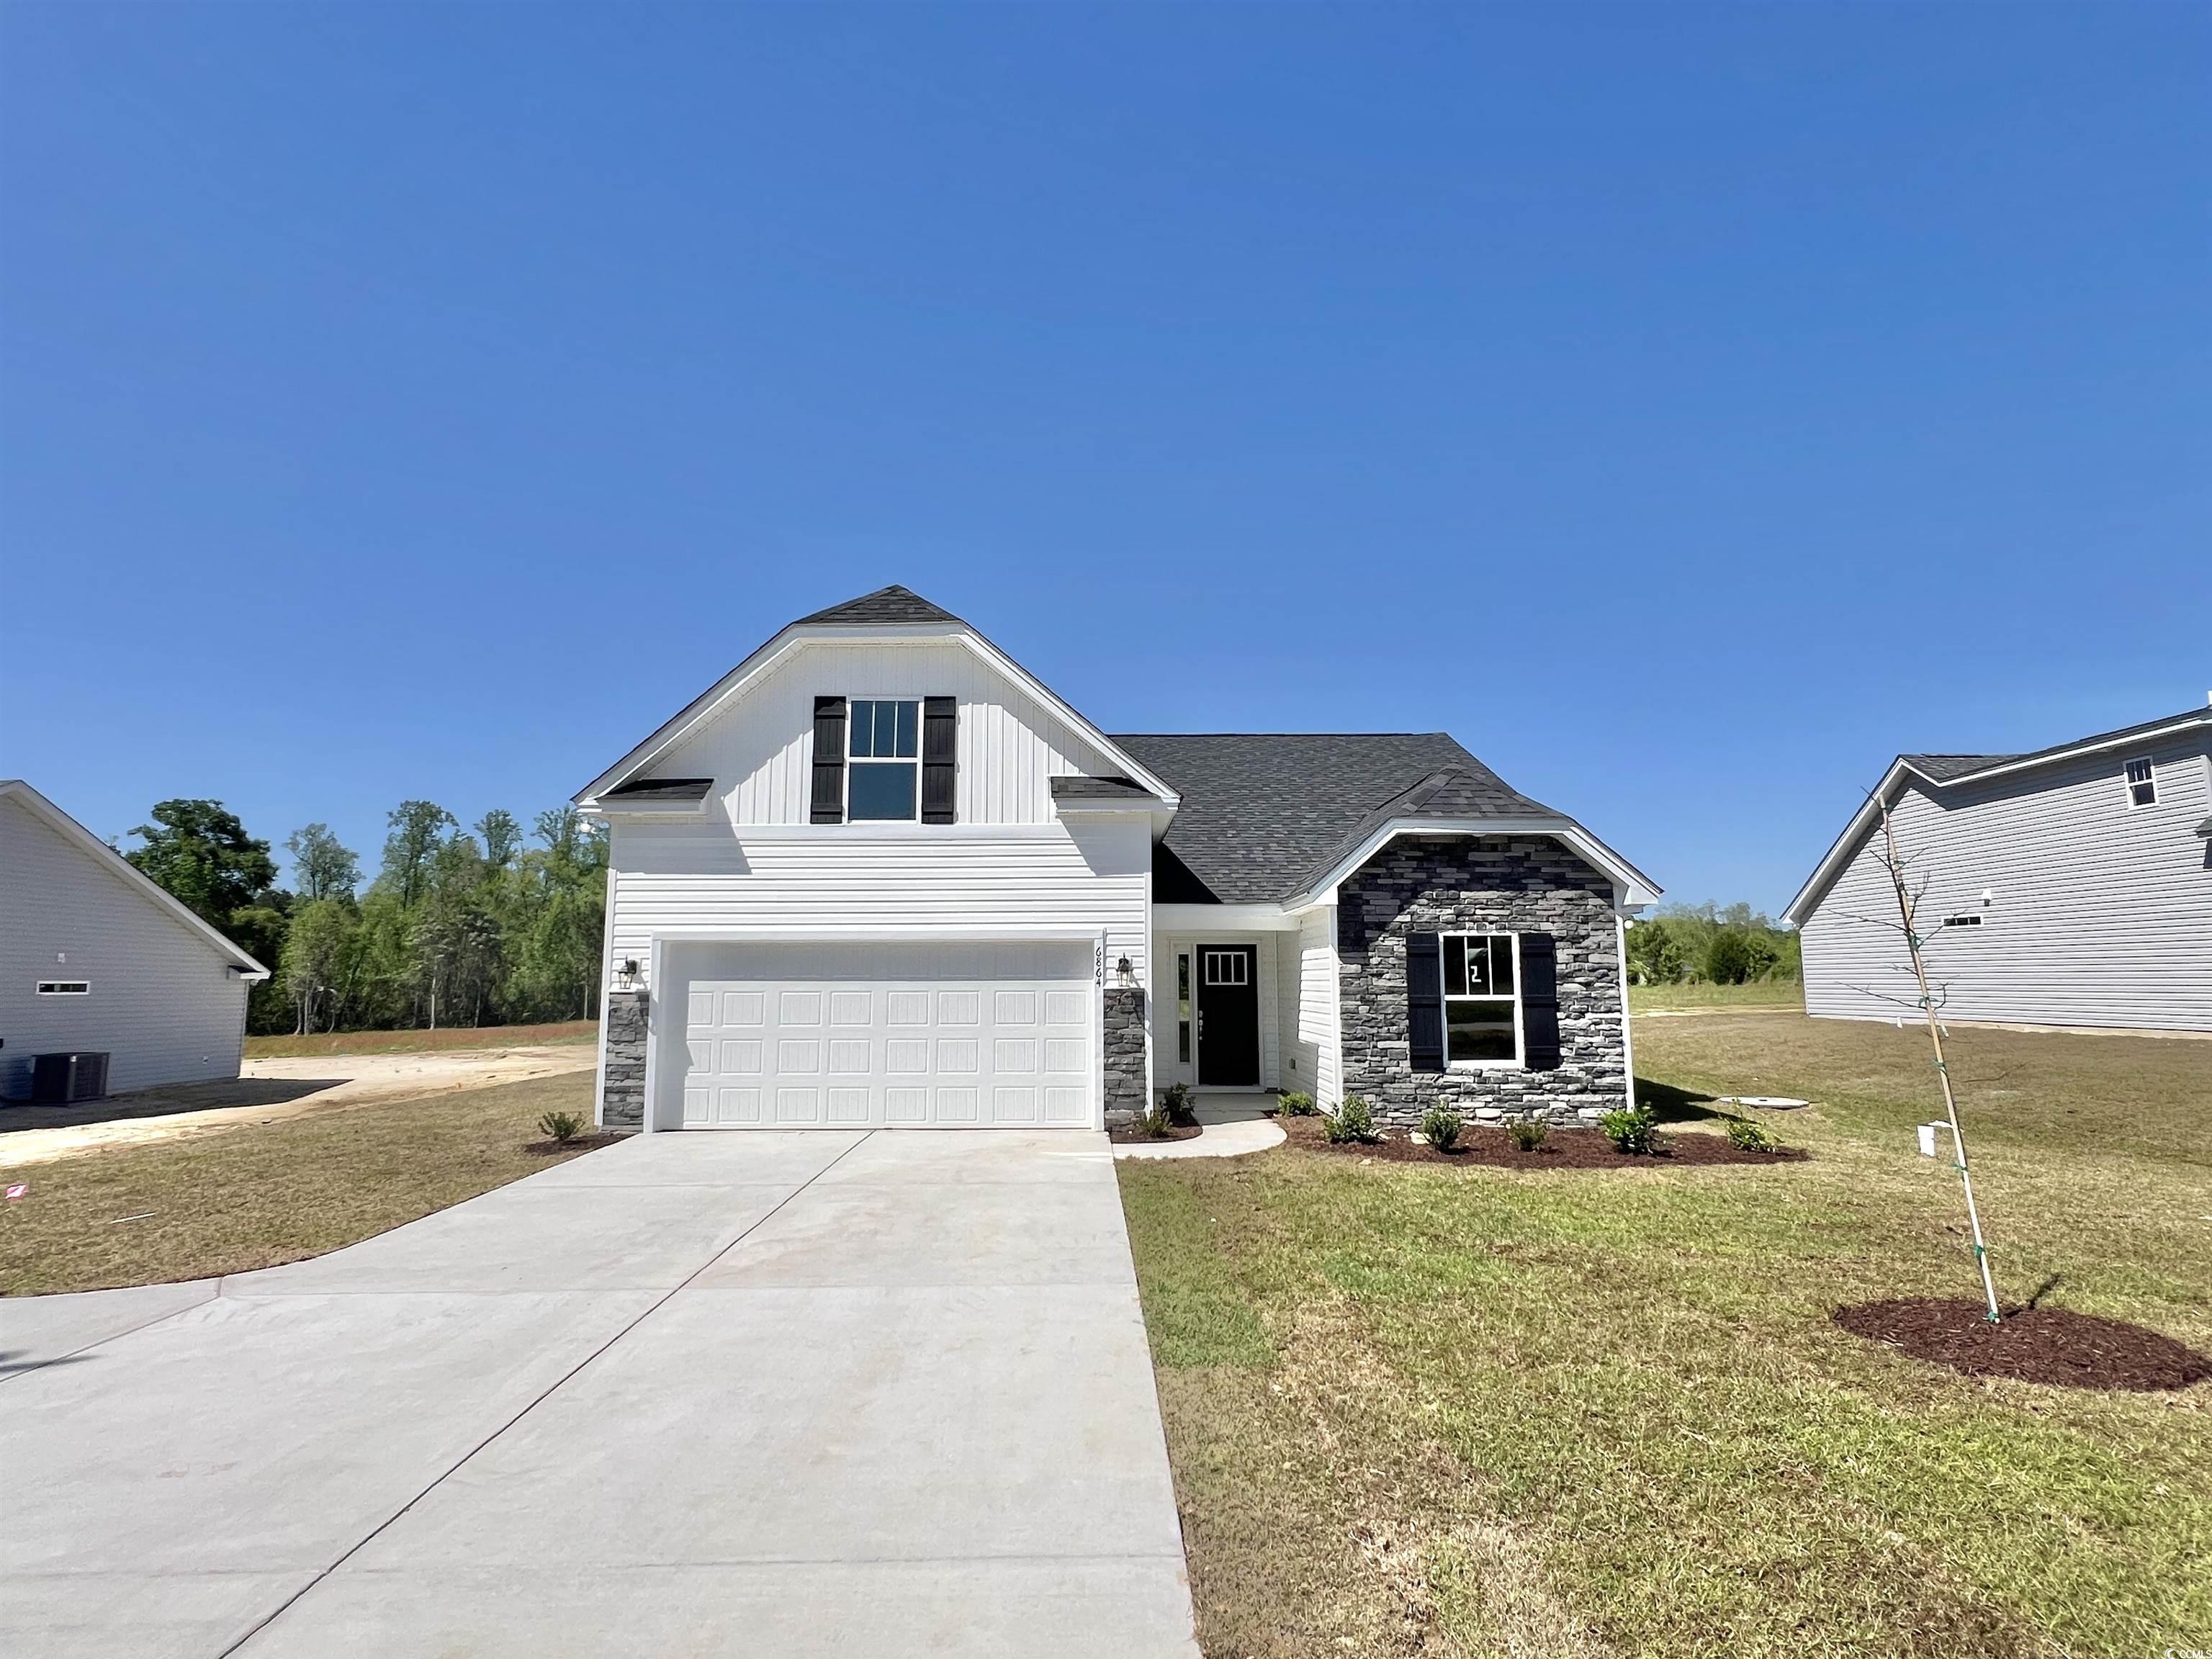 **move in ready** new construction, 4br/3bath home on 1/2 acre lot!! have you been looking for a new, no hoa home on a large lot close to the beach, but away from the hustle and bustle??? if so, this beauty is the one!!! bring your rv, boat, utility trailer, and install your pool and detached building. this yard can accommodate it all!!! this well-appointed home features huge upgraded wood-look laminate flooring in the great room, dining area, and entry/hallway, granite countertops in the kitchen, tile flooring in the bathrooms, laundry and kitchen, double vanity and custom tile walk-in shower & soaker tub in the master bath, vaulted ceilings & ceiling fans in living room and all the bedrooms, and an irrigation system to keep your yard green during the summer months. this home has a very peaceful setting in conway yet offers a short drive to all the grand strand has to offer. as the new owner of this gorgeous home you'll never be far away from golfing, fishing, dining, shopping... sand, sun and fun!!!